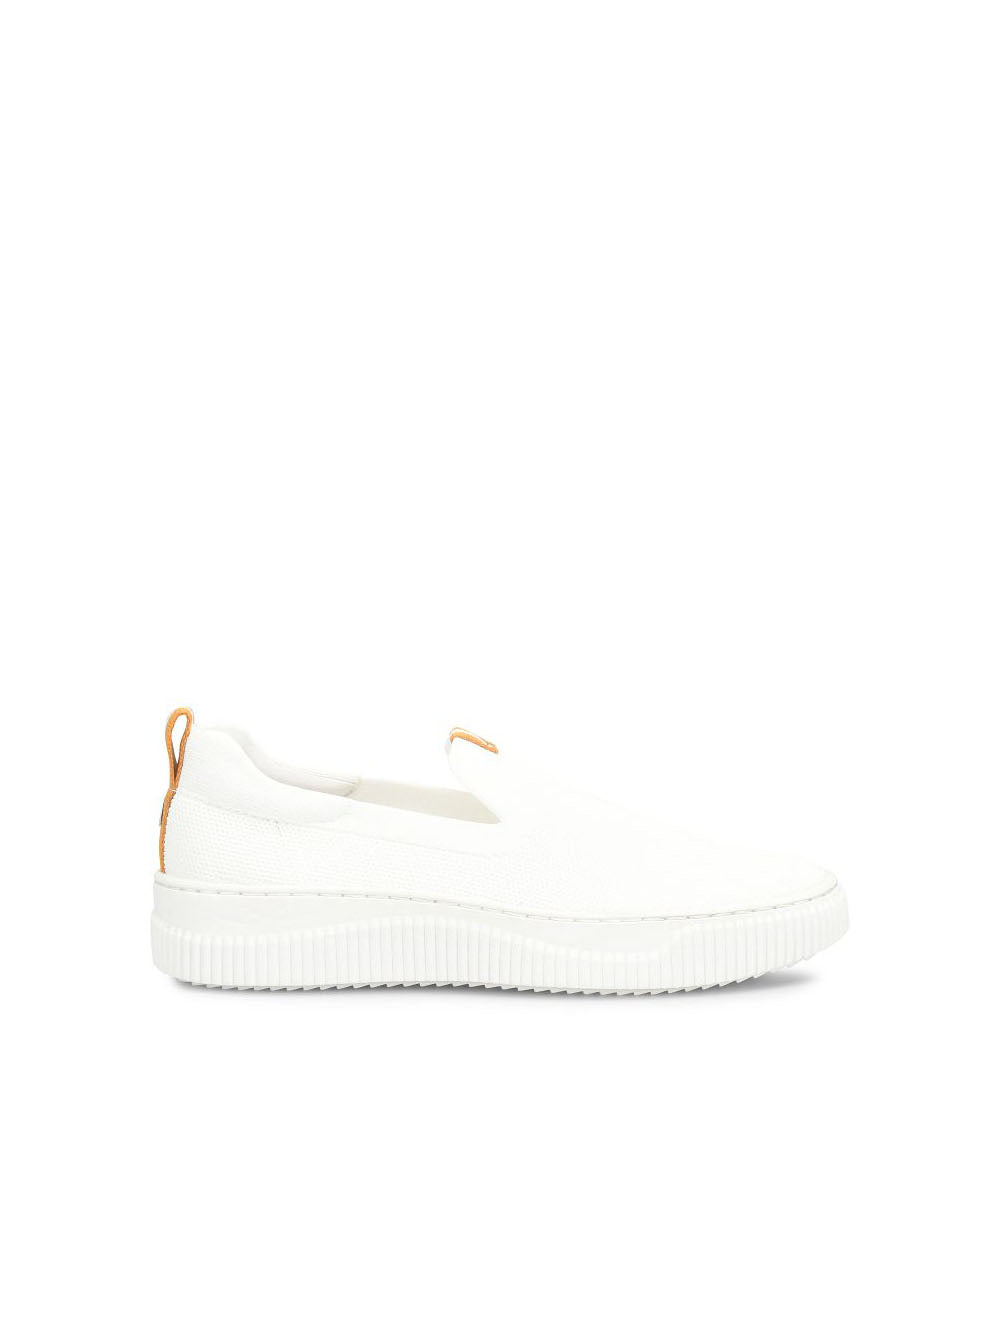 sofft shoes frayda mesh slip on sneakers in white with orange detail